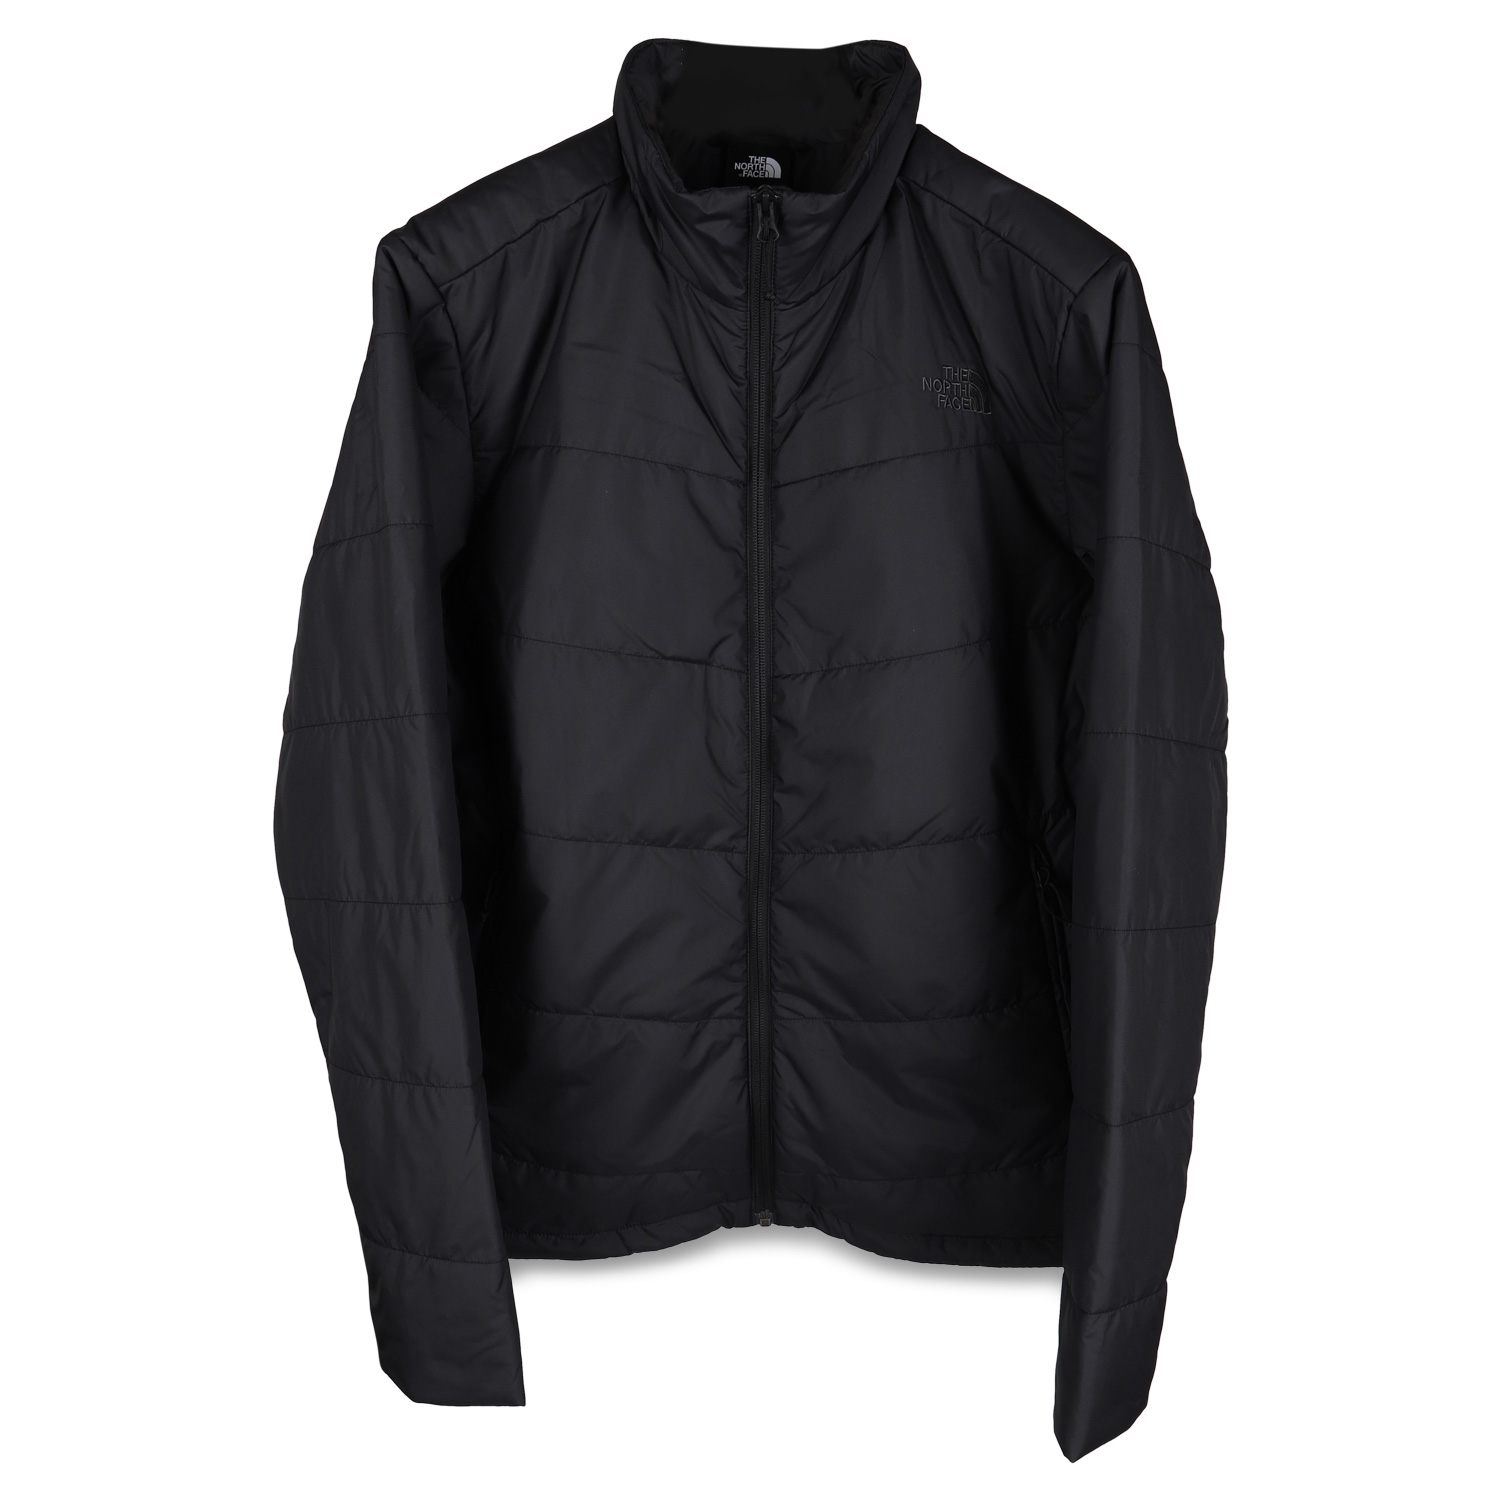 THE NORTH FACE ジャケット 中綿 メンズ JUNCTION INSULATED JAC...